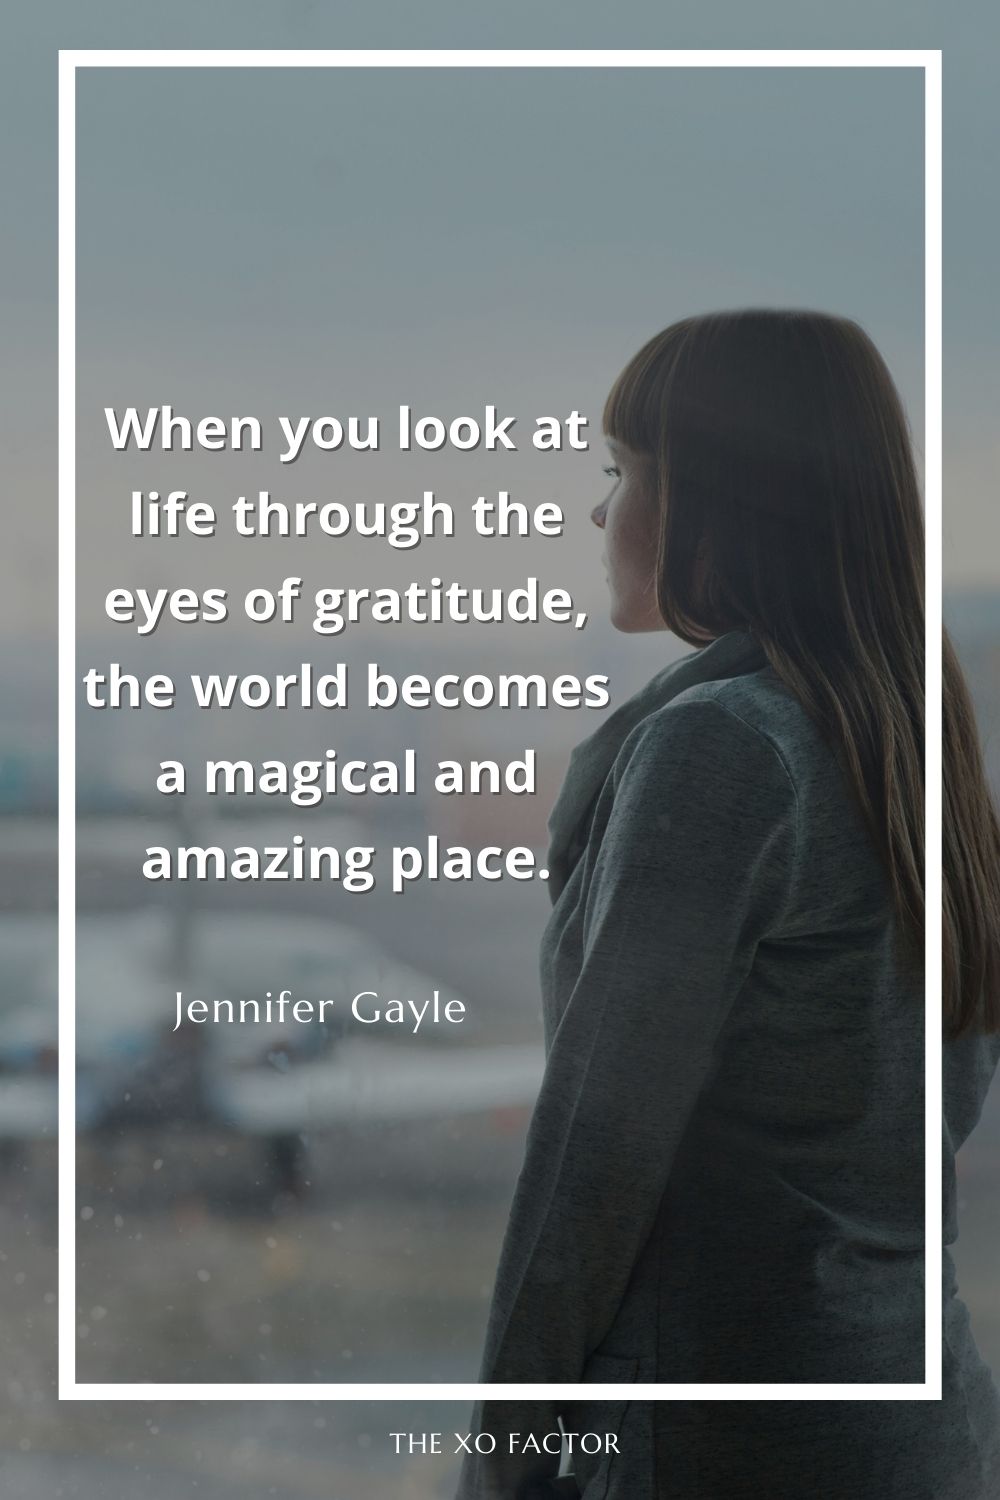 When you look at life through the eyes of gratitude, the world becomes a magical and amazing place.